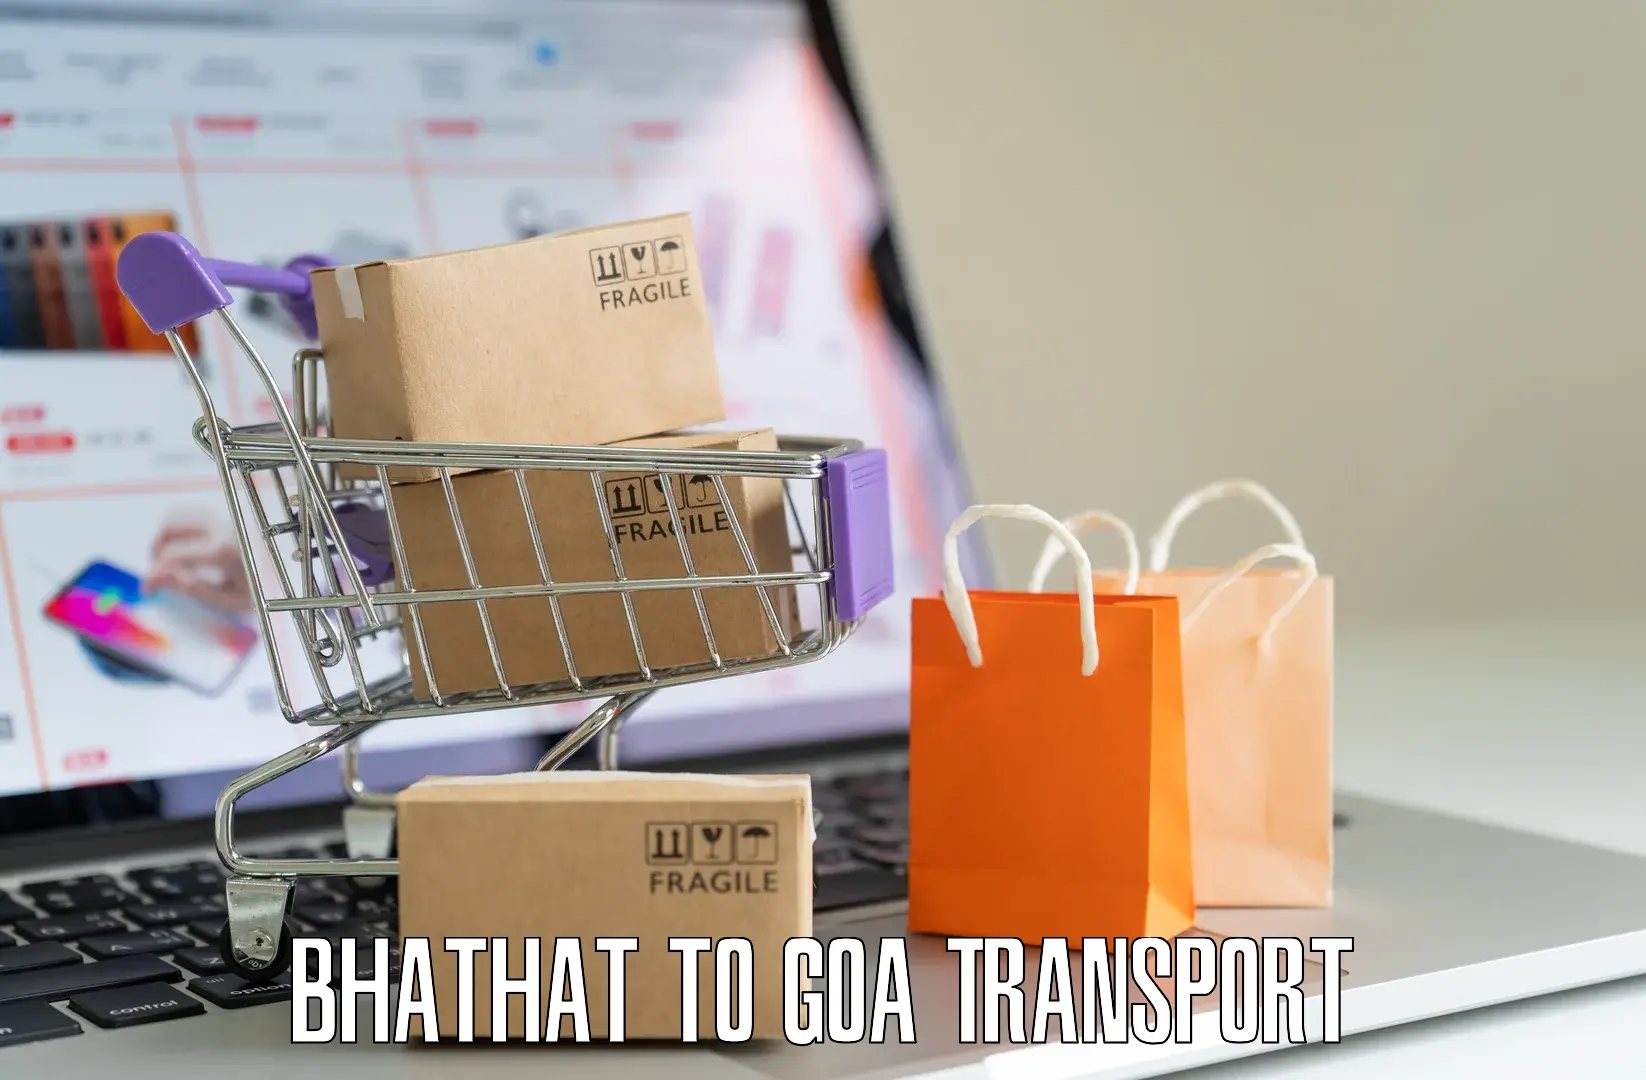 Express transport services Bhathat to Bardez